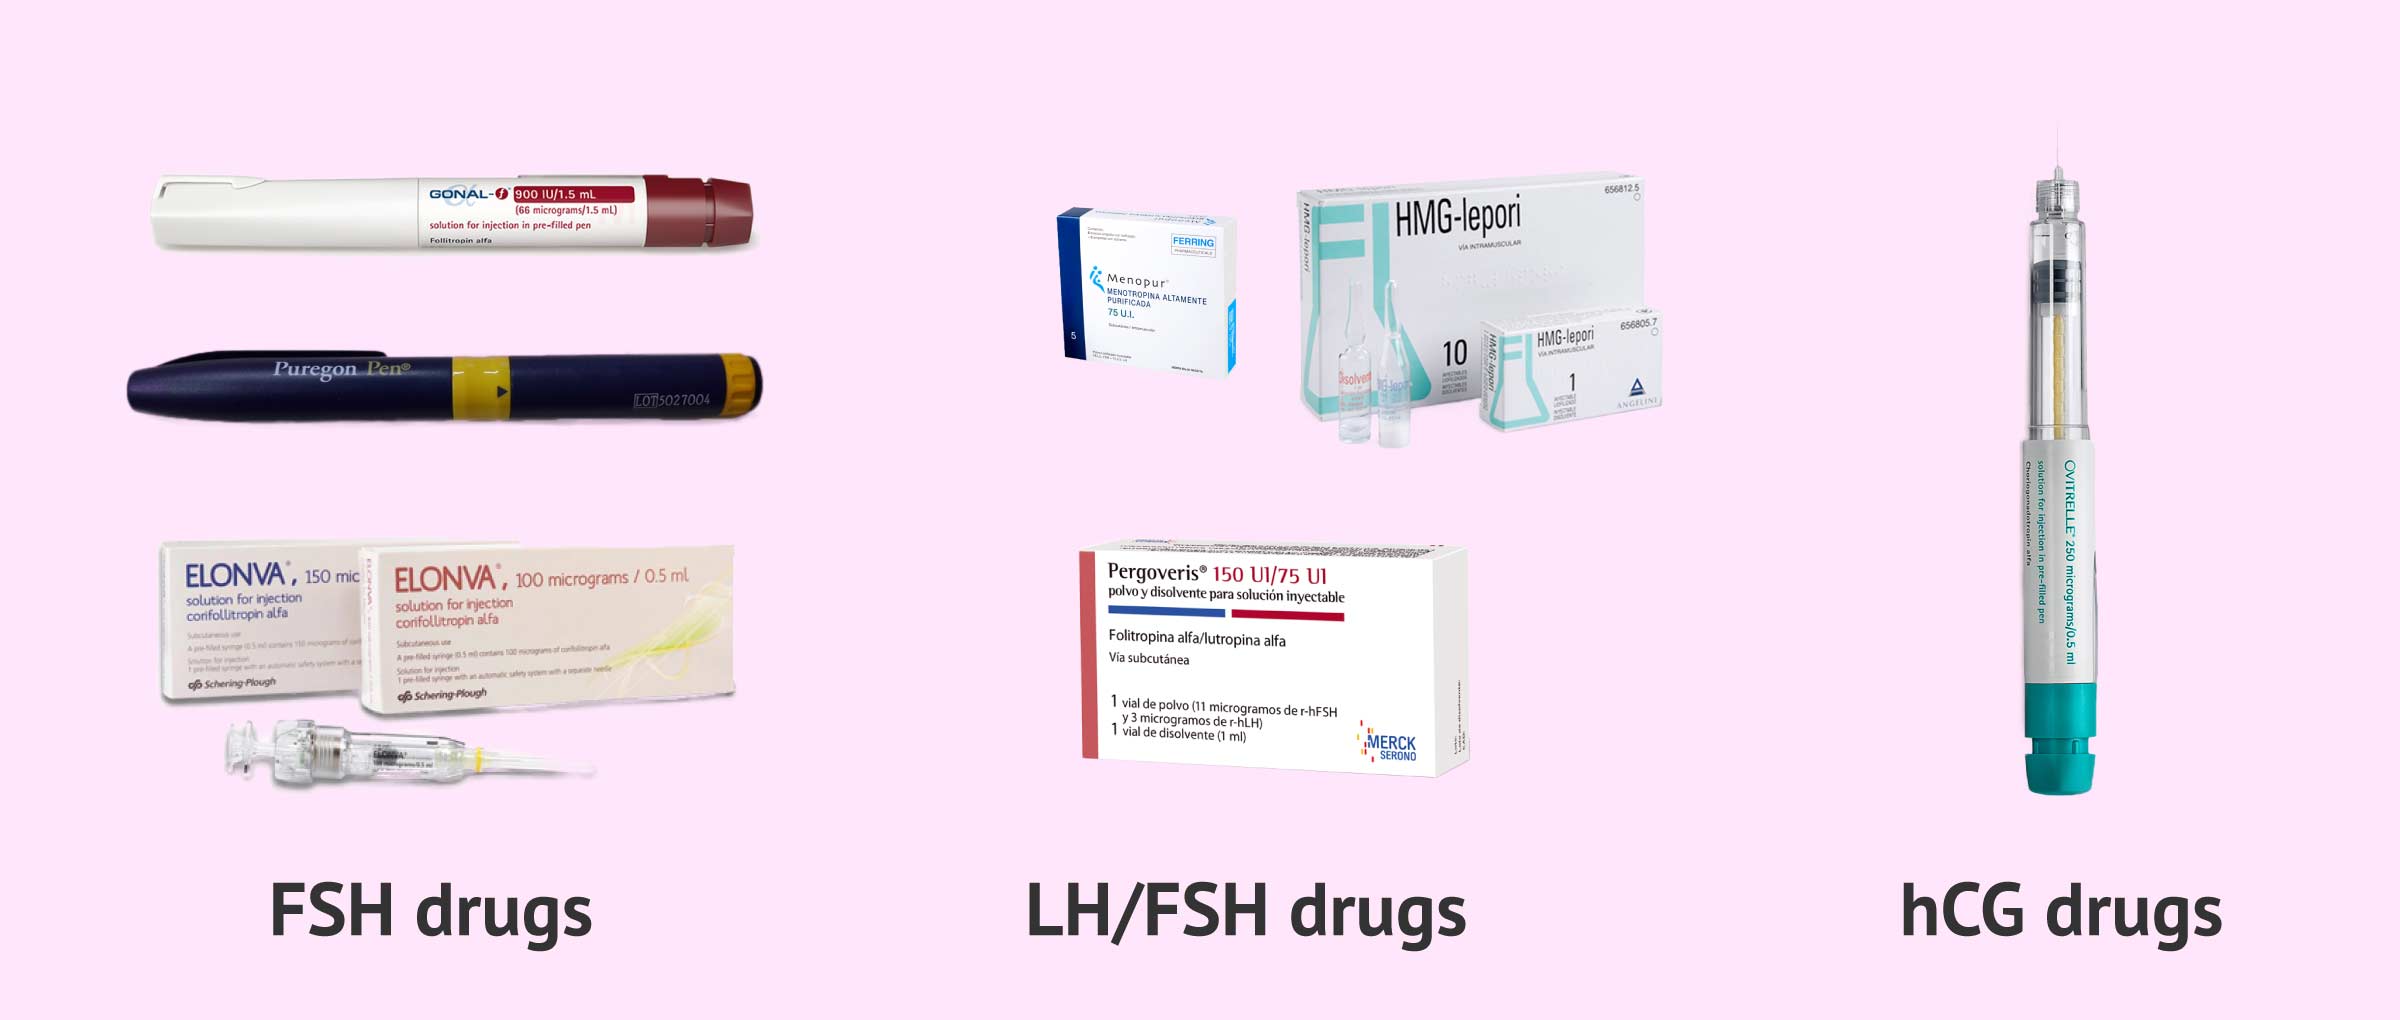 Drugs which contain gonadotropines for ovarian stimulation